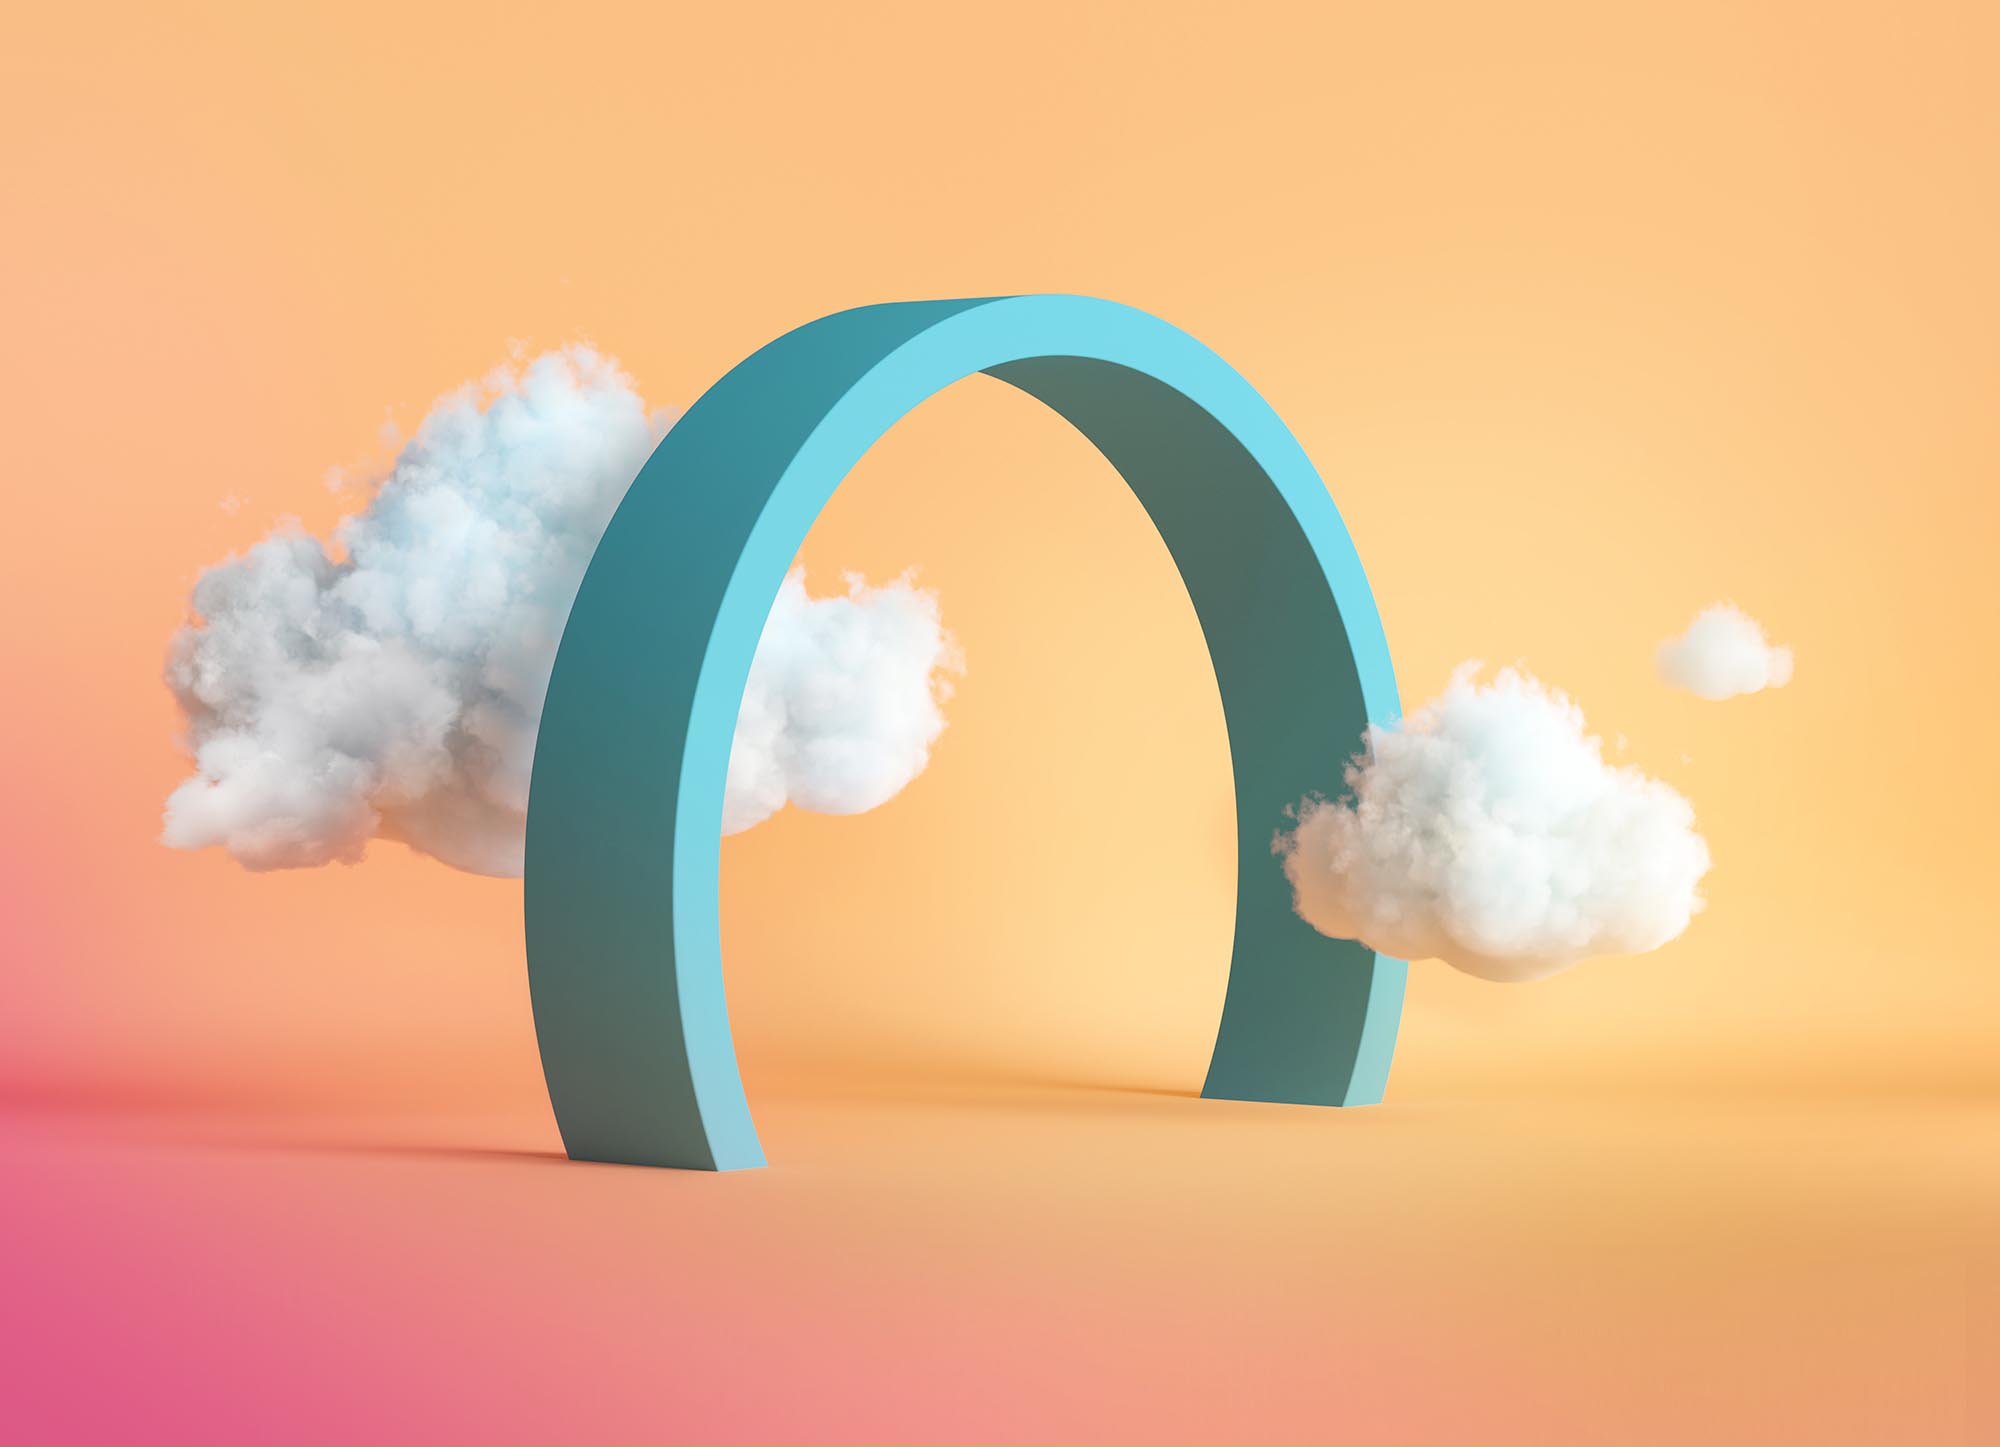 abstract peachy background with blue round arch and white clouds